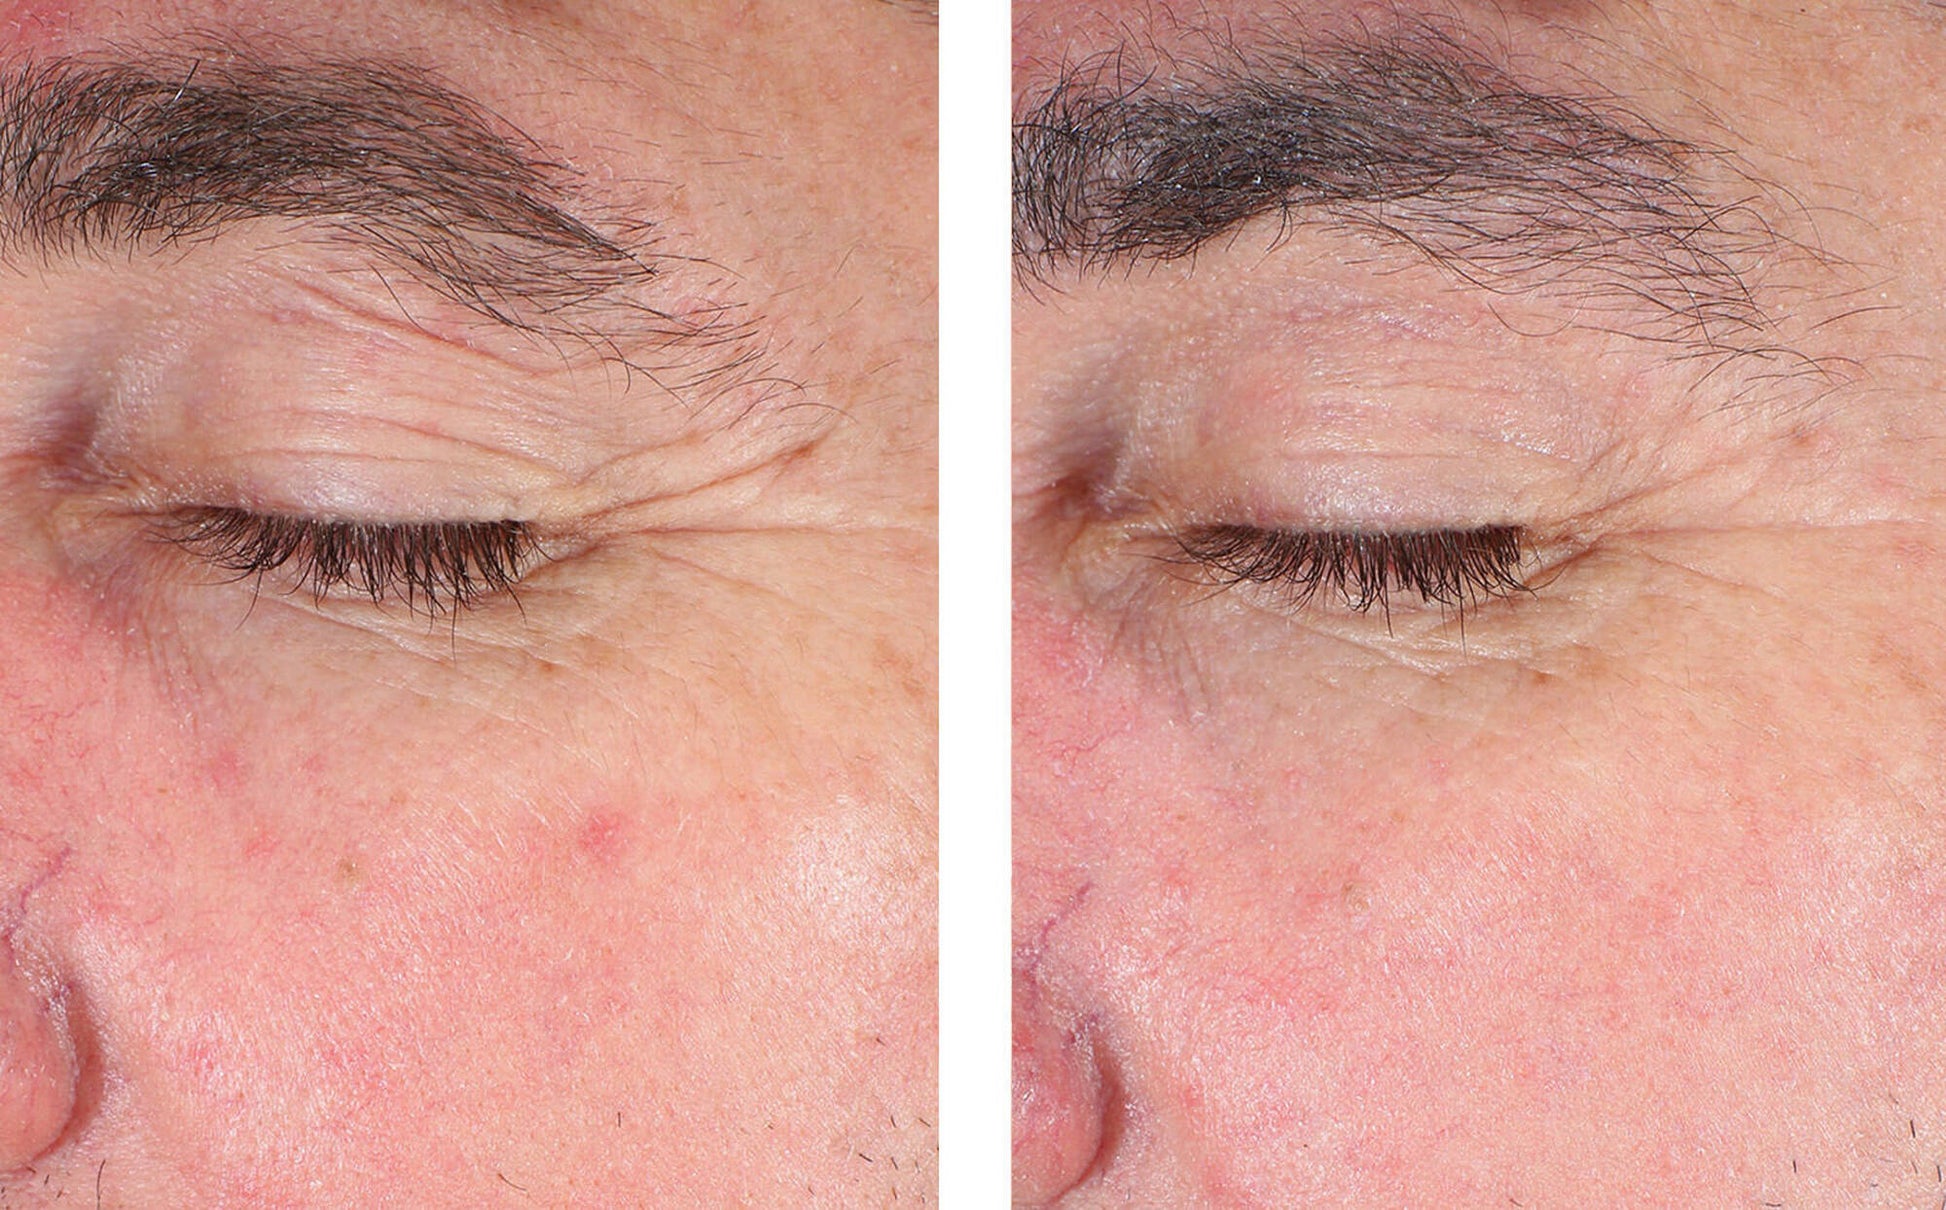 skinbetter eyemax eye cream before and after